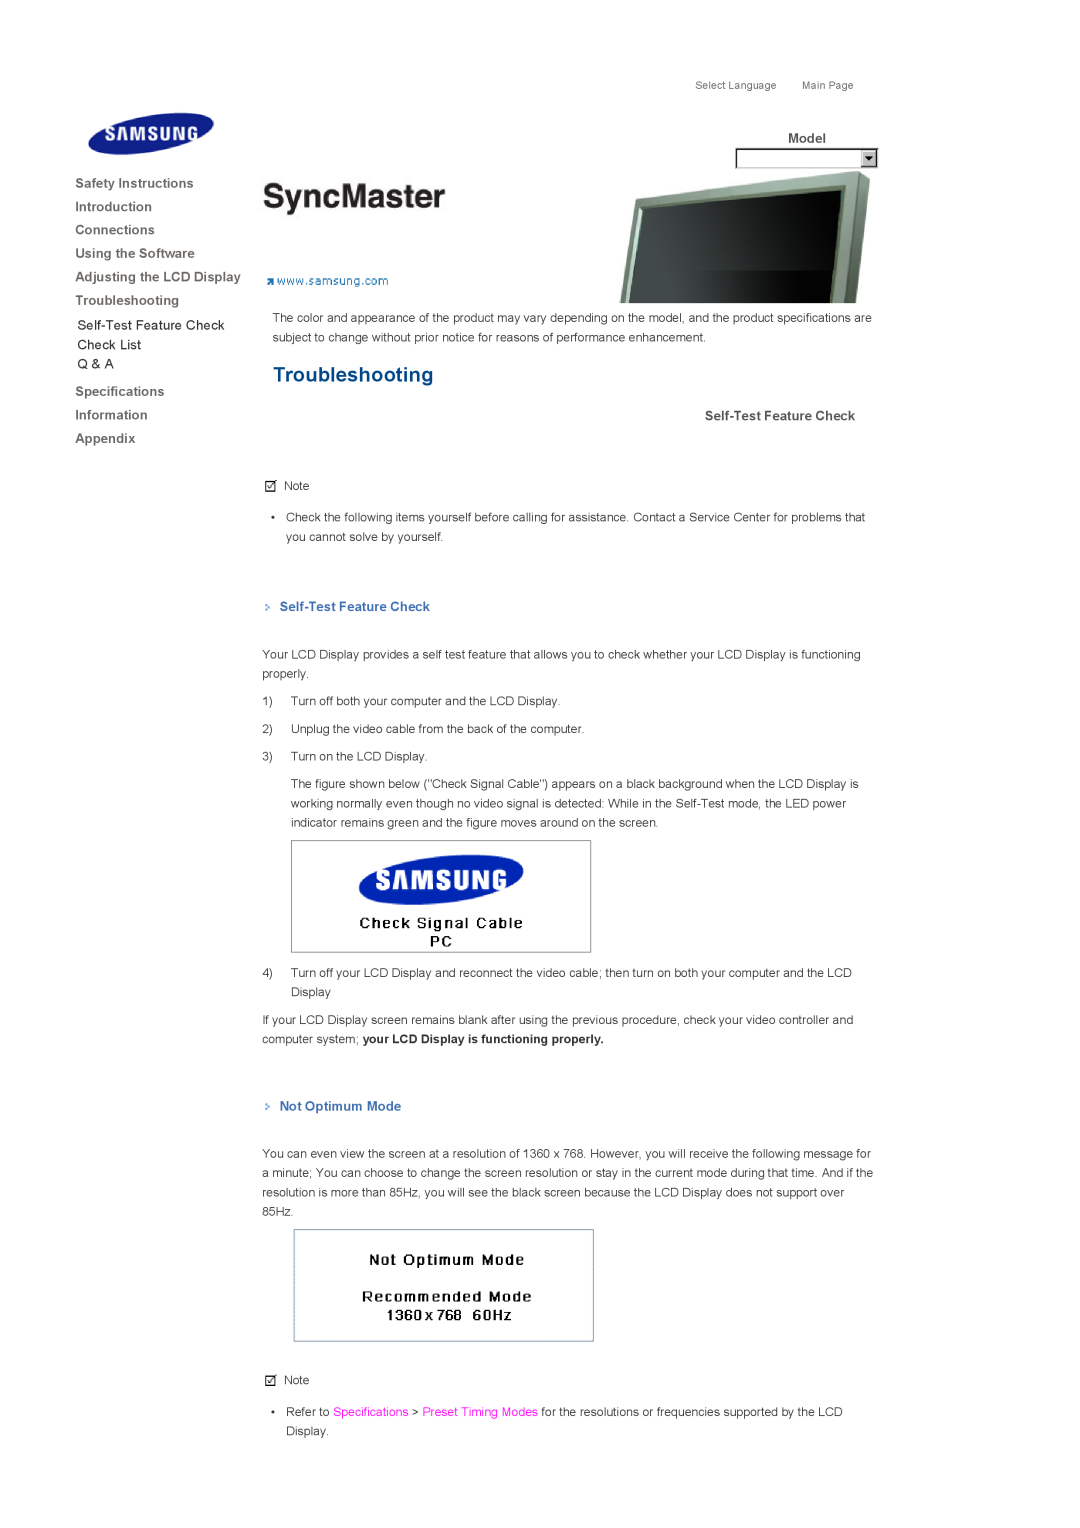 Samsung 460DX Troubleshooting, Safety Instructions Introduction Connections Using the Software, Model, Not Optimum Mode 